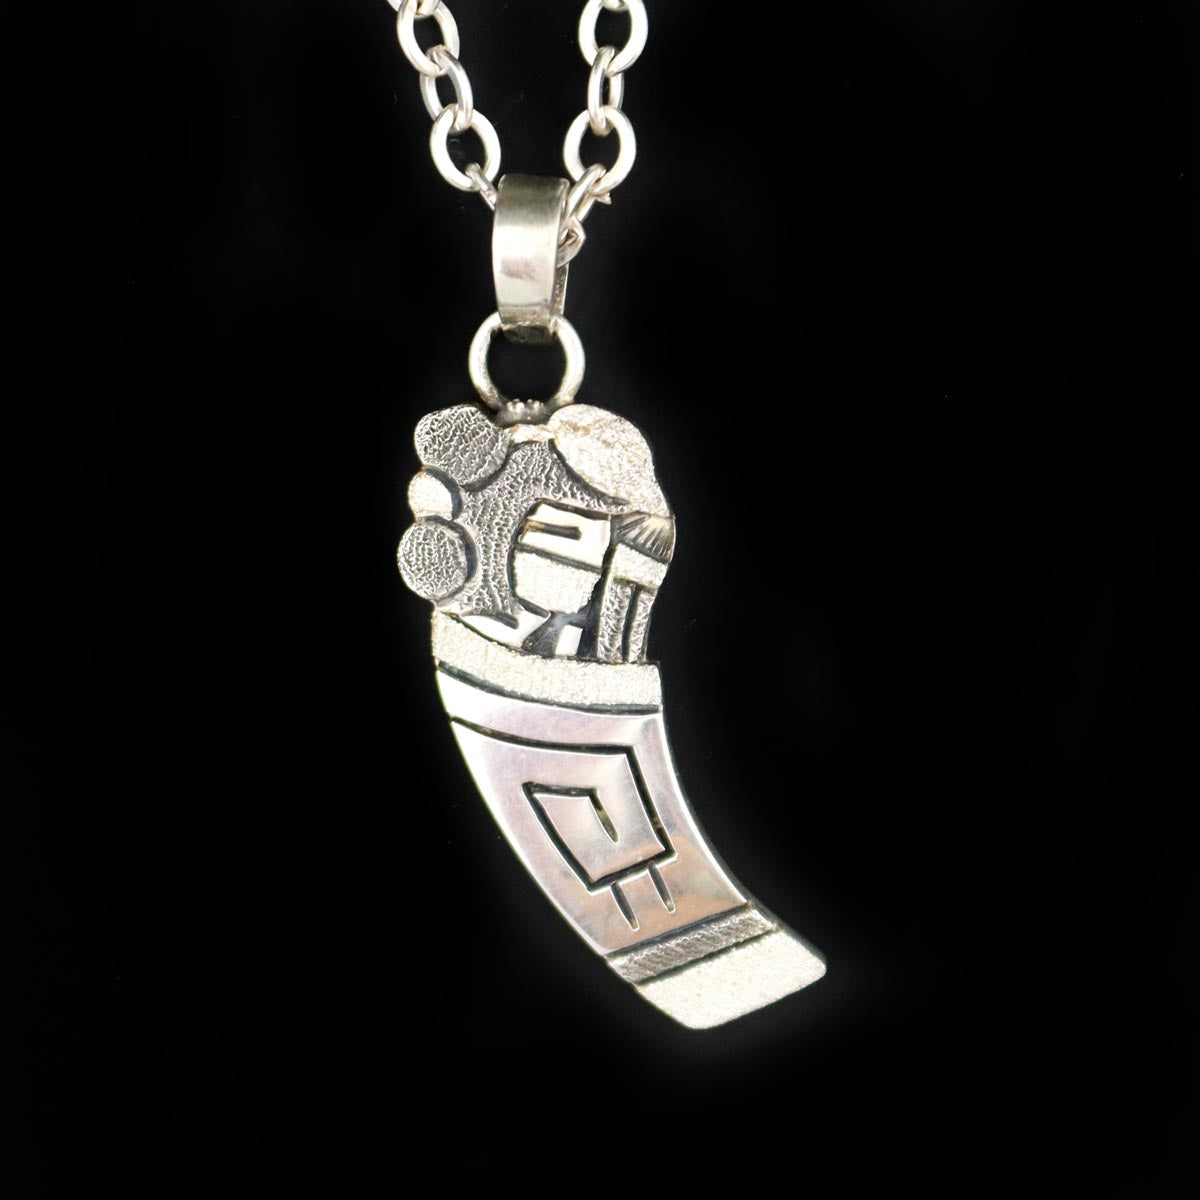 Ronald Wadsworth - Hopi Contemporary Sterling Silver Overlay Kachina Pendant with Chain, 23" length (J14963)
